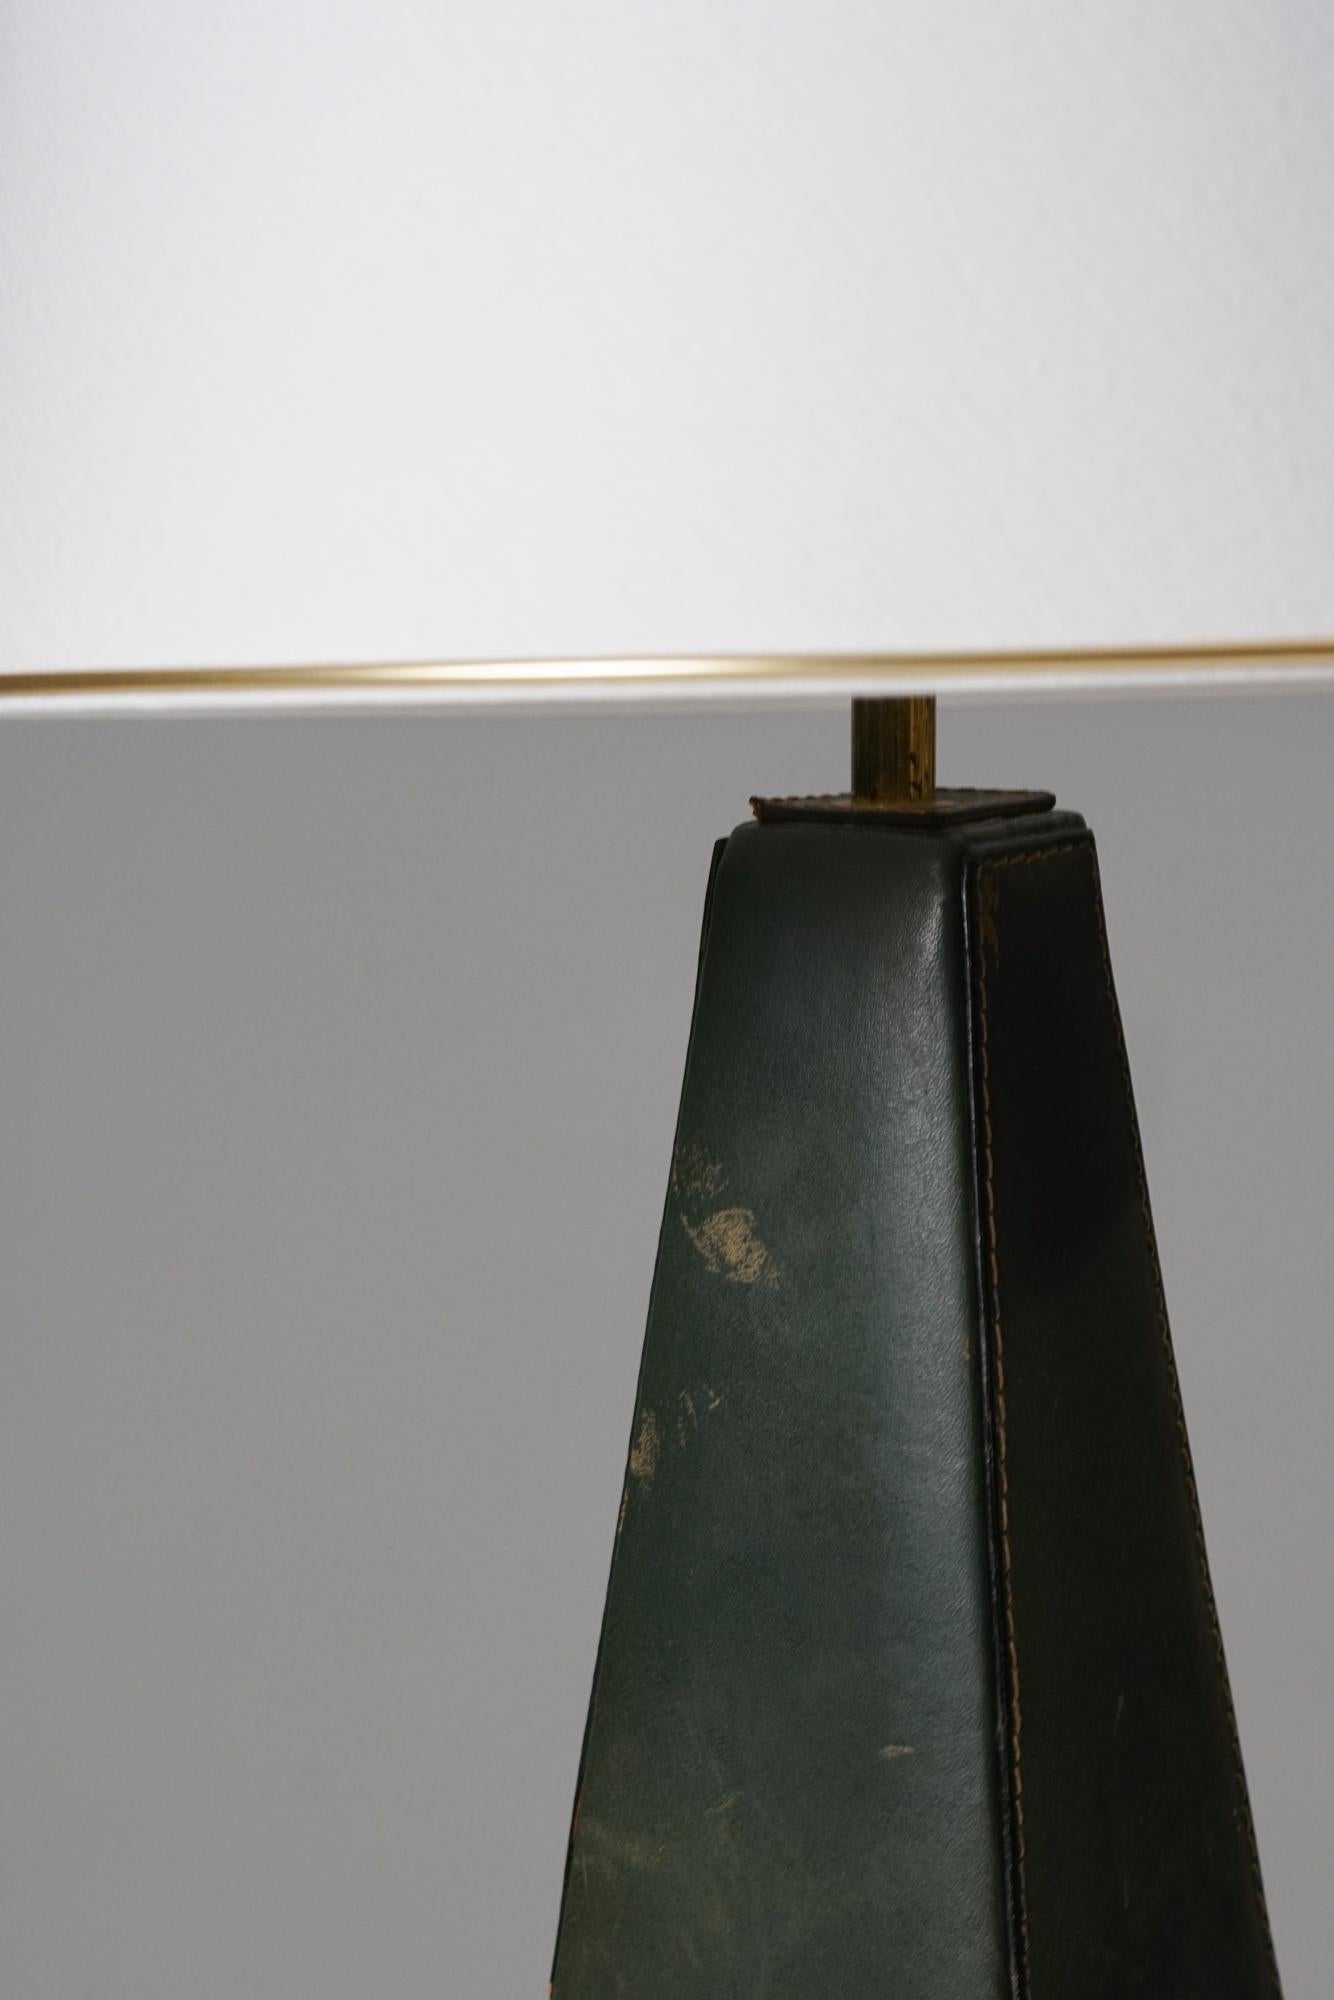 Mid-20th Century Lisa Johansson-Pape Rare Leather Table Lamp, Orno Oy, 1960s For Sale